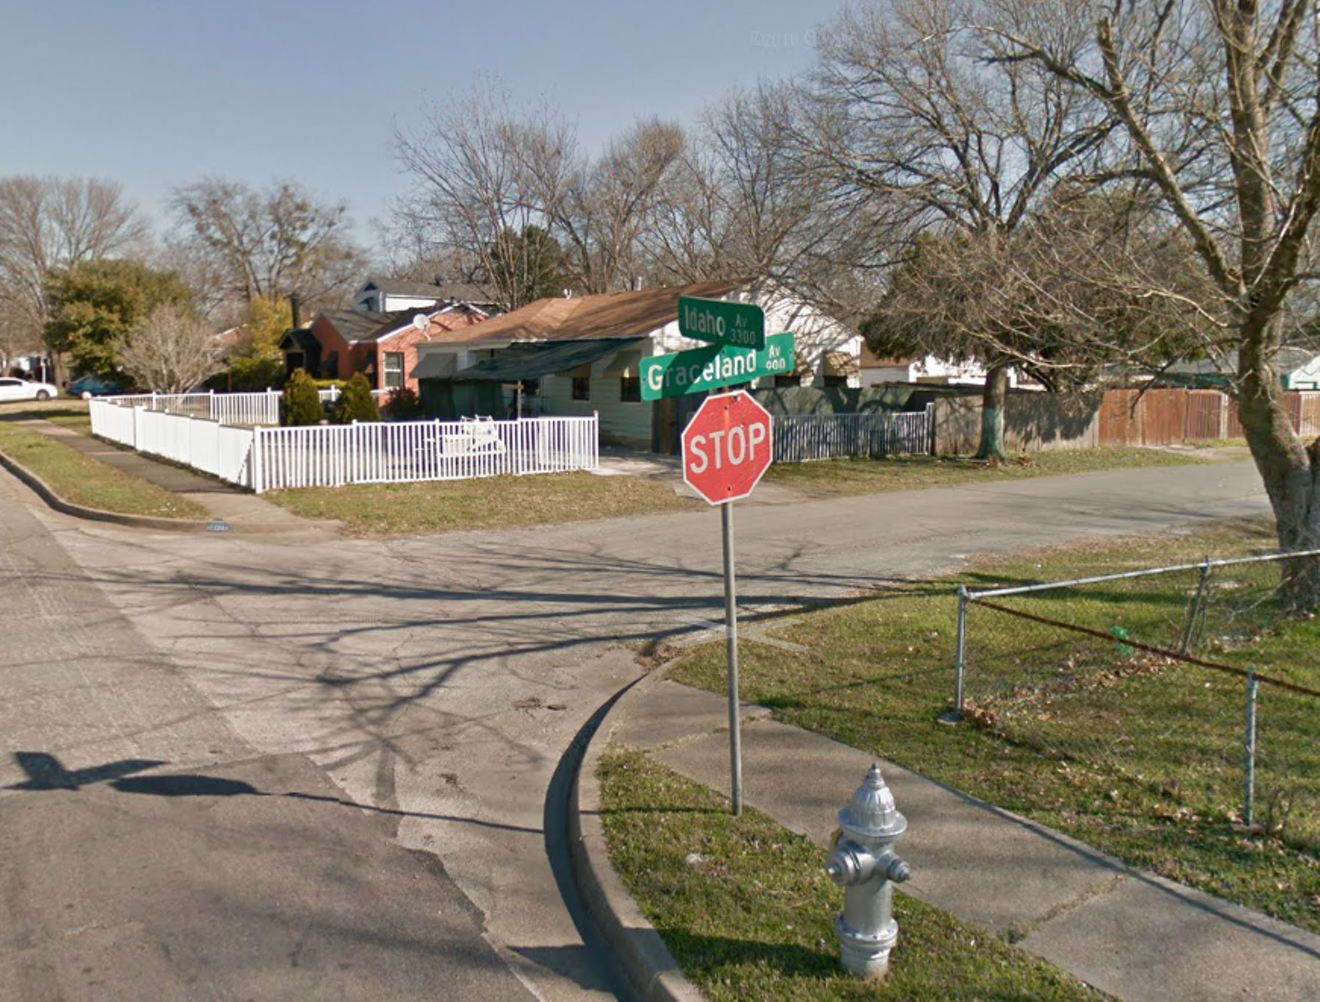 South Dallas has been plagued by home invasions, the most recent reported in the 3300 block of Idaho Avenue.